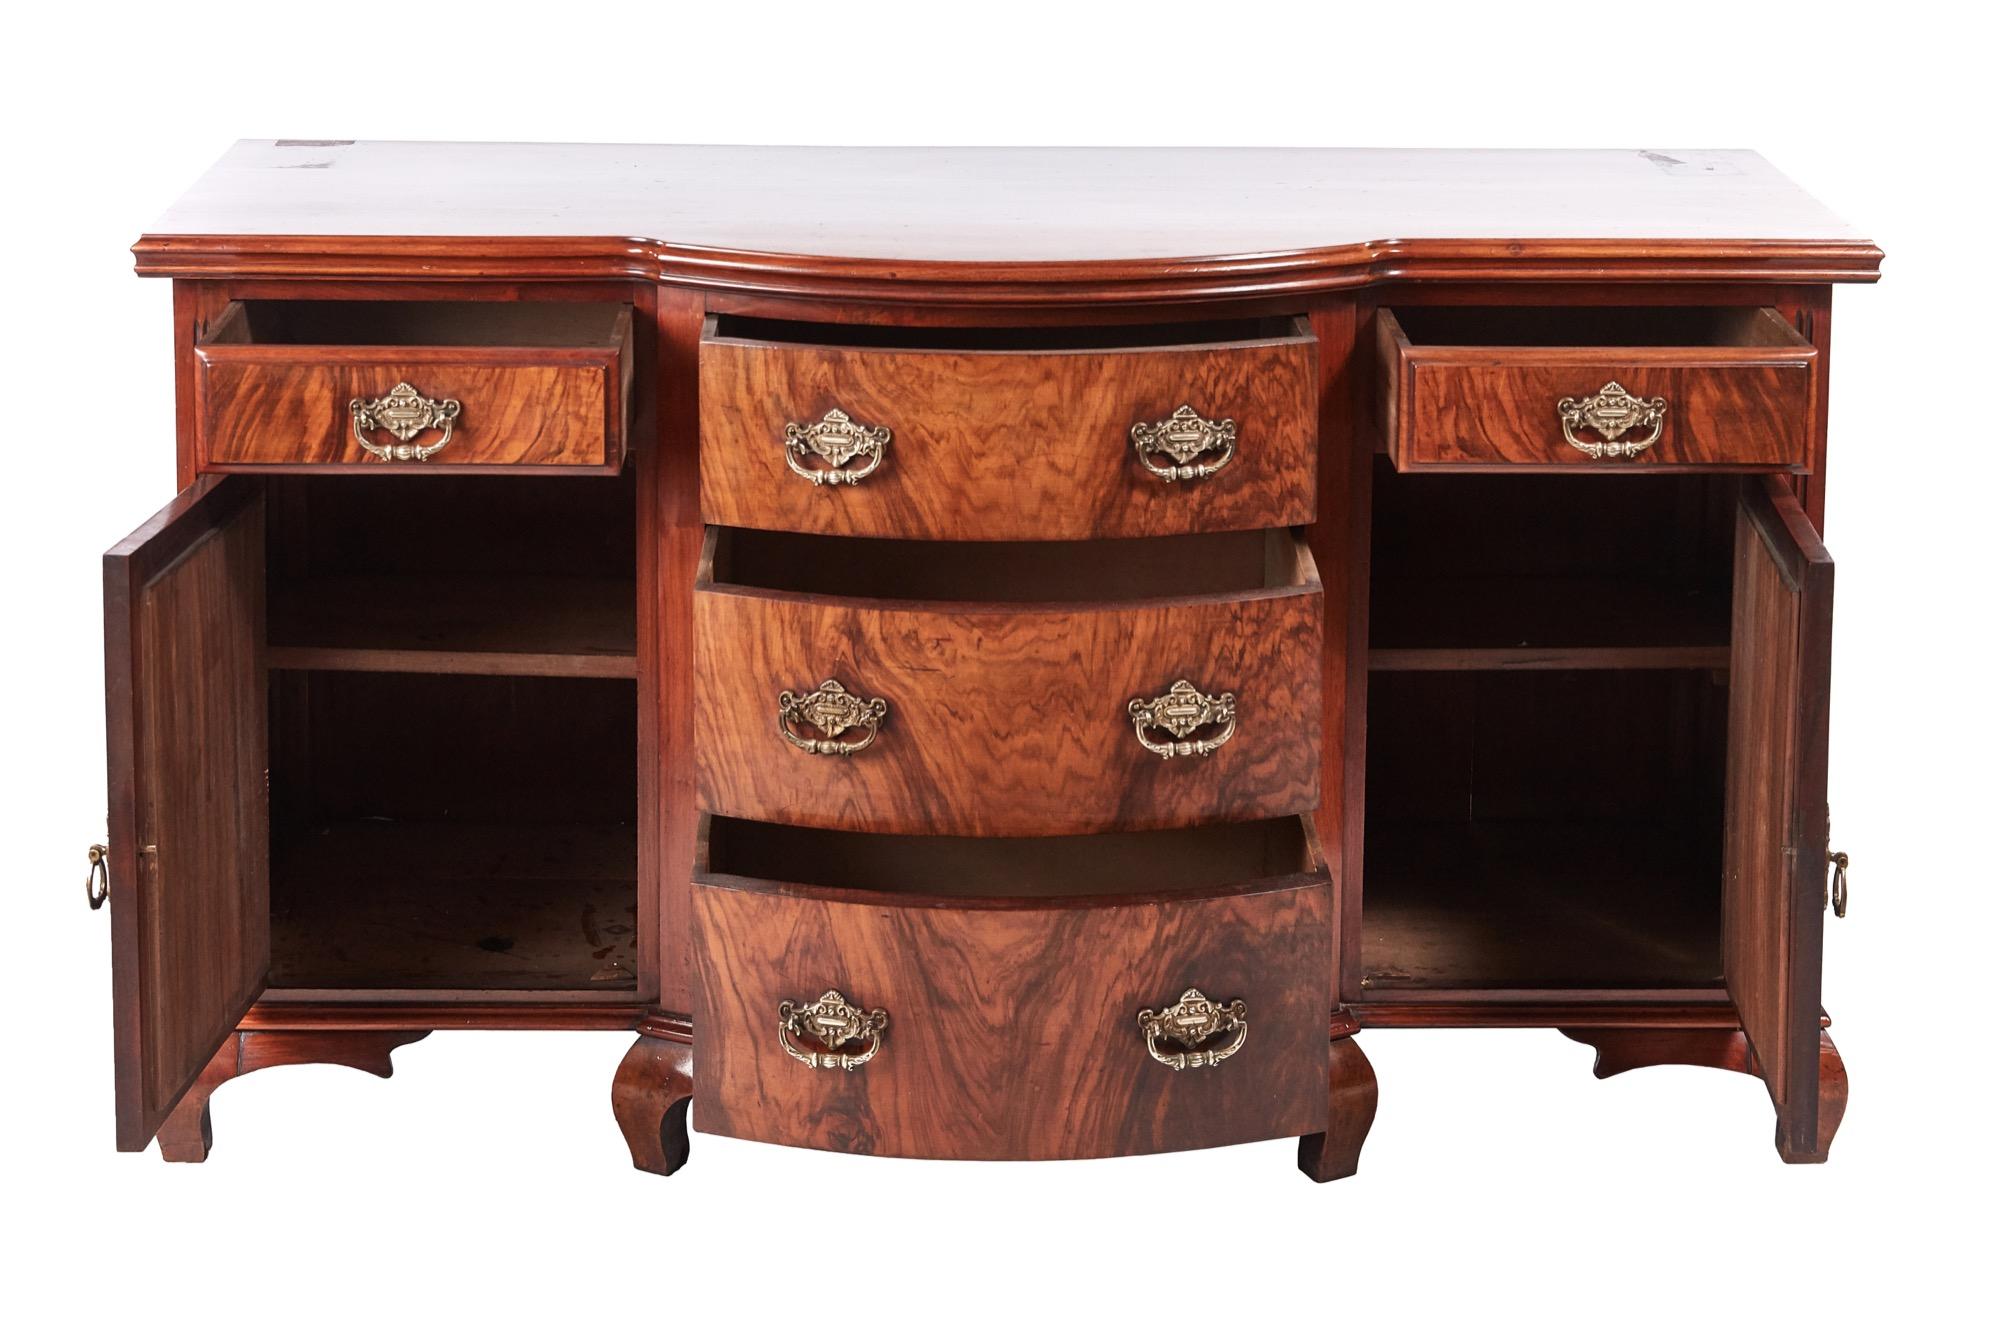 Fantastic quality antique Victorian carved walnut sideboard with a beautiful shaped walnut top, five lovely walnut drawers with original brass handles, two carved solid walnut doors original brass handles opening to reveal a fitted shelf interior.